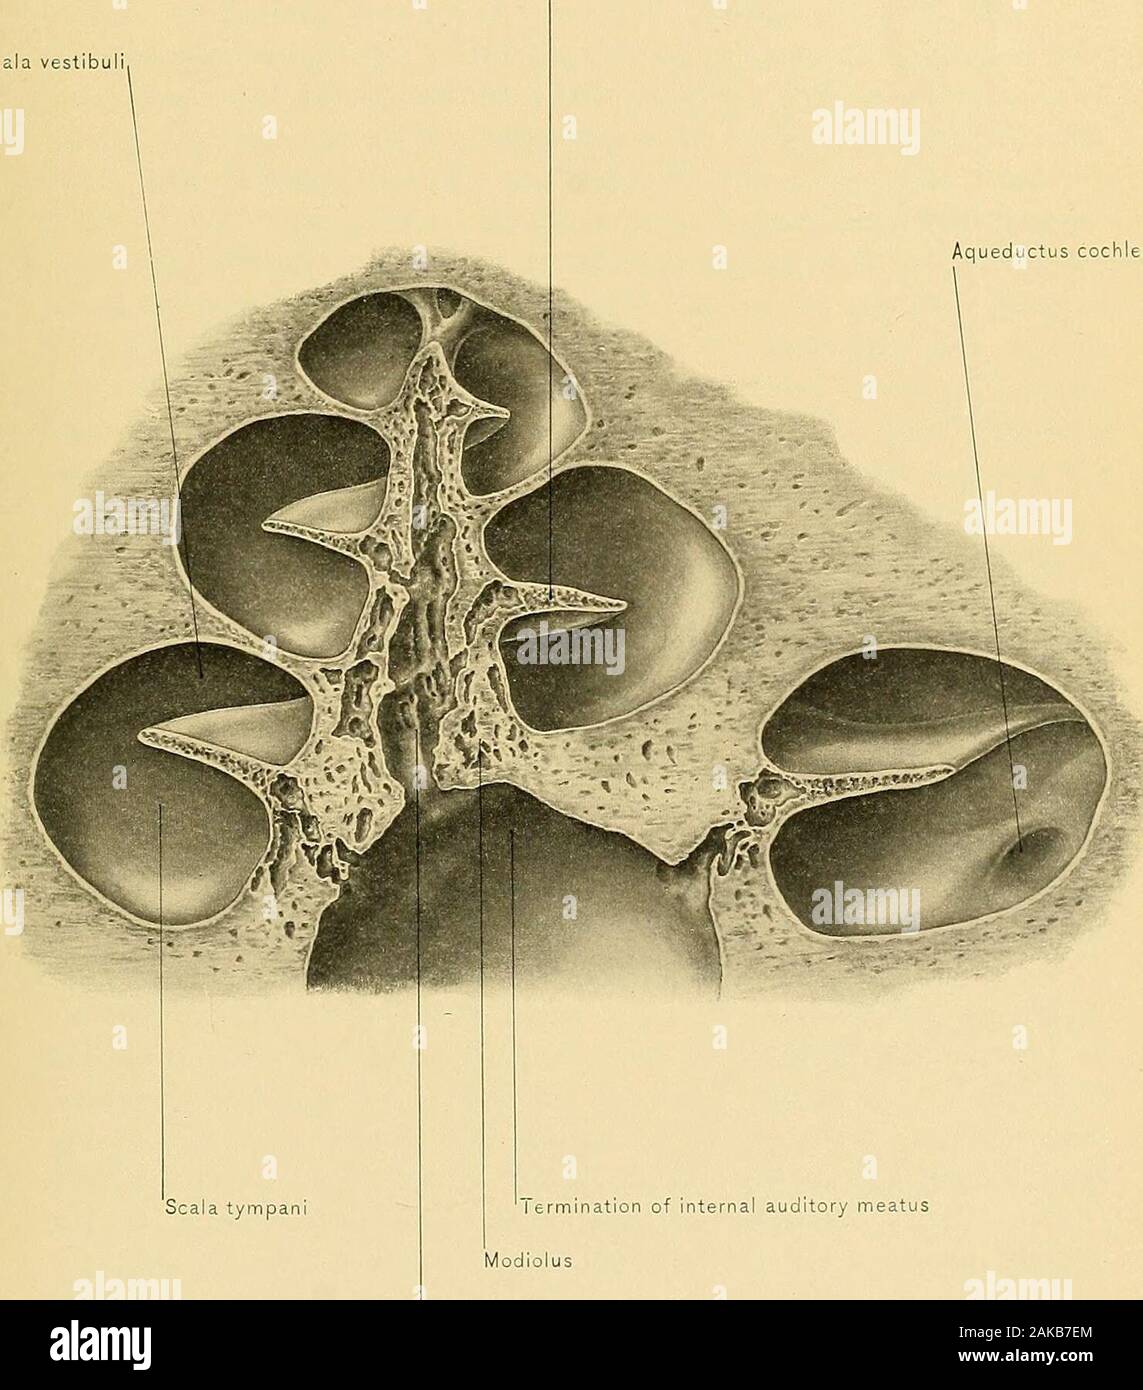 Surgical anatomy : a treatise on human anatomy in its application to the practice of medicine and surgery . Aqueductus cochlese INTERIOR OF OSSEOUS PORTION OF COCHLEA,434 PLATE CCLIX, Lamina spiralis Scala vestibul Aqueductus cochleas. Scala tympan lermination of internal auditory meatusModiolusCentral canal of the modiolus SECTION OF OSSEOUS PORTION OF COCHLEA,435 THE ORGAN OF HEARING. 437 In the vestibule are found two vesicles, the utricle and the saccule, theformer lying partly in the fovea hemielliptica, and the latter in the fovea hemi-spherica. The membranous semicircular canals open in Stock Photo